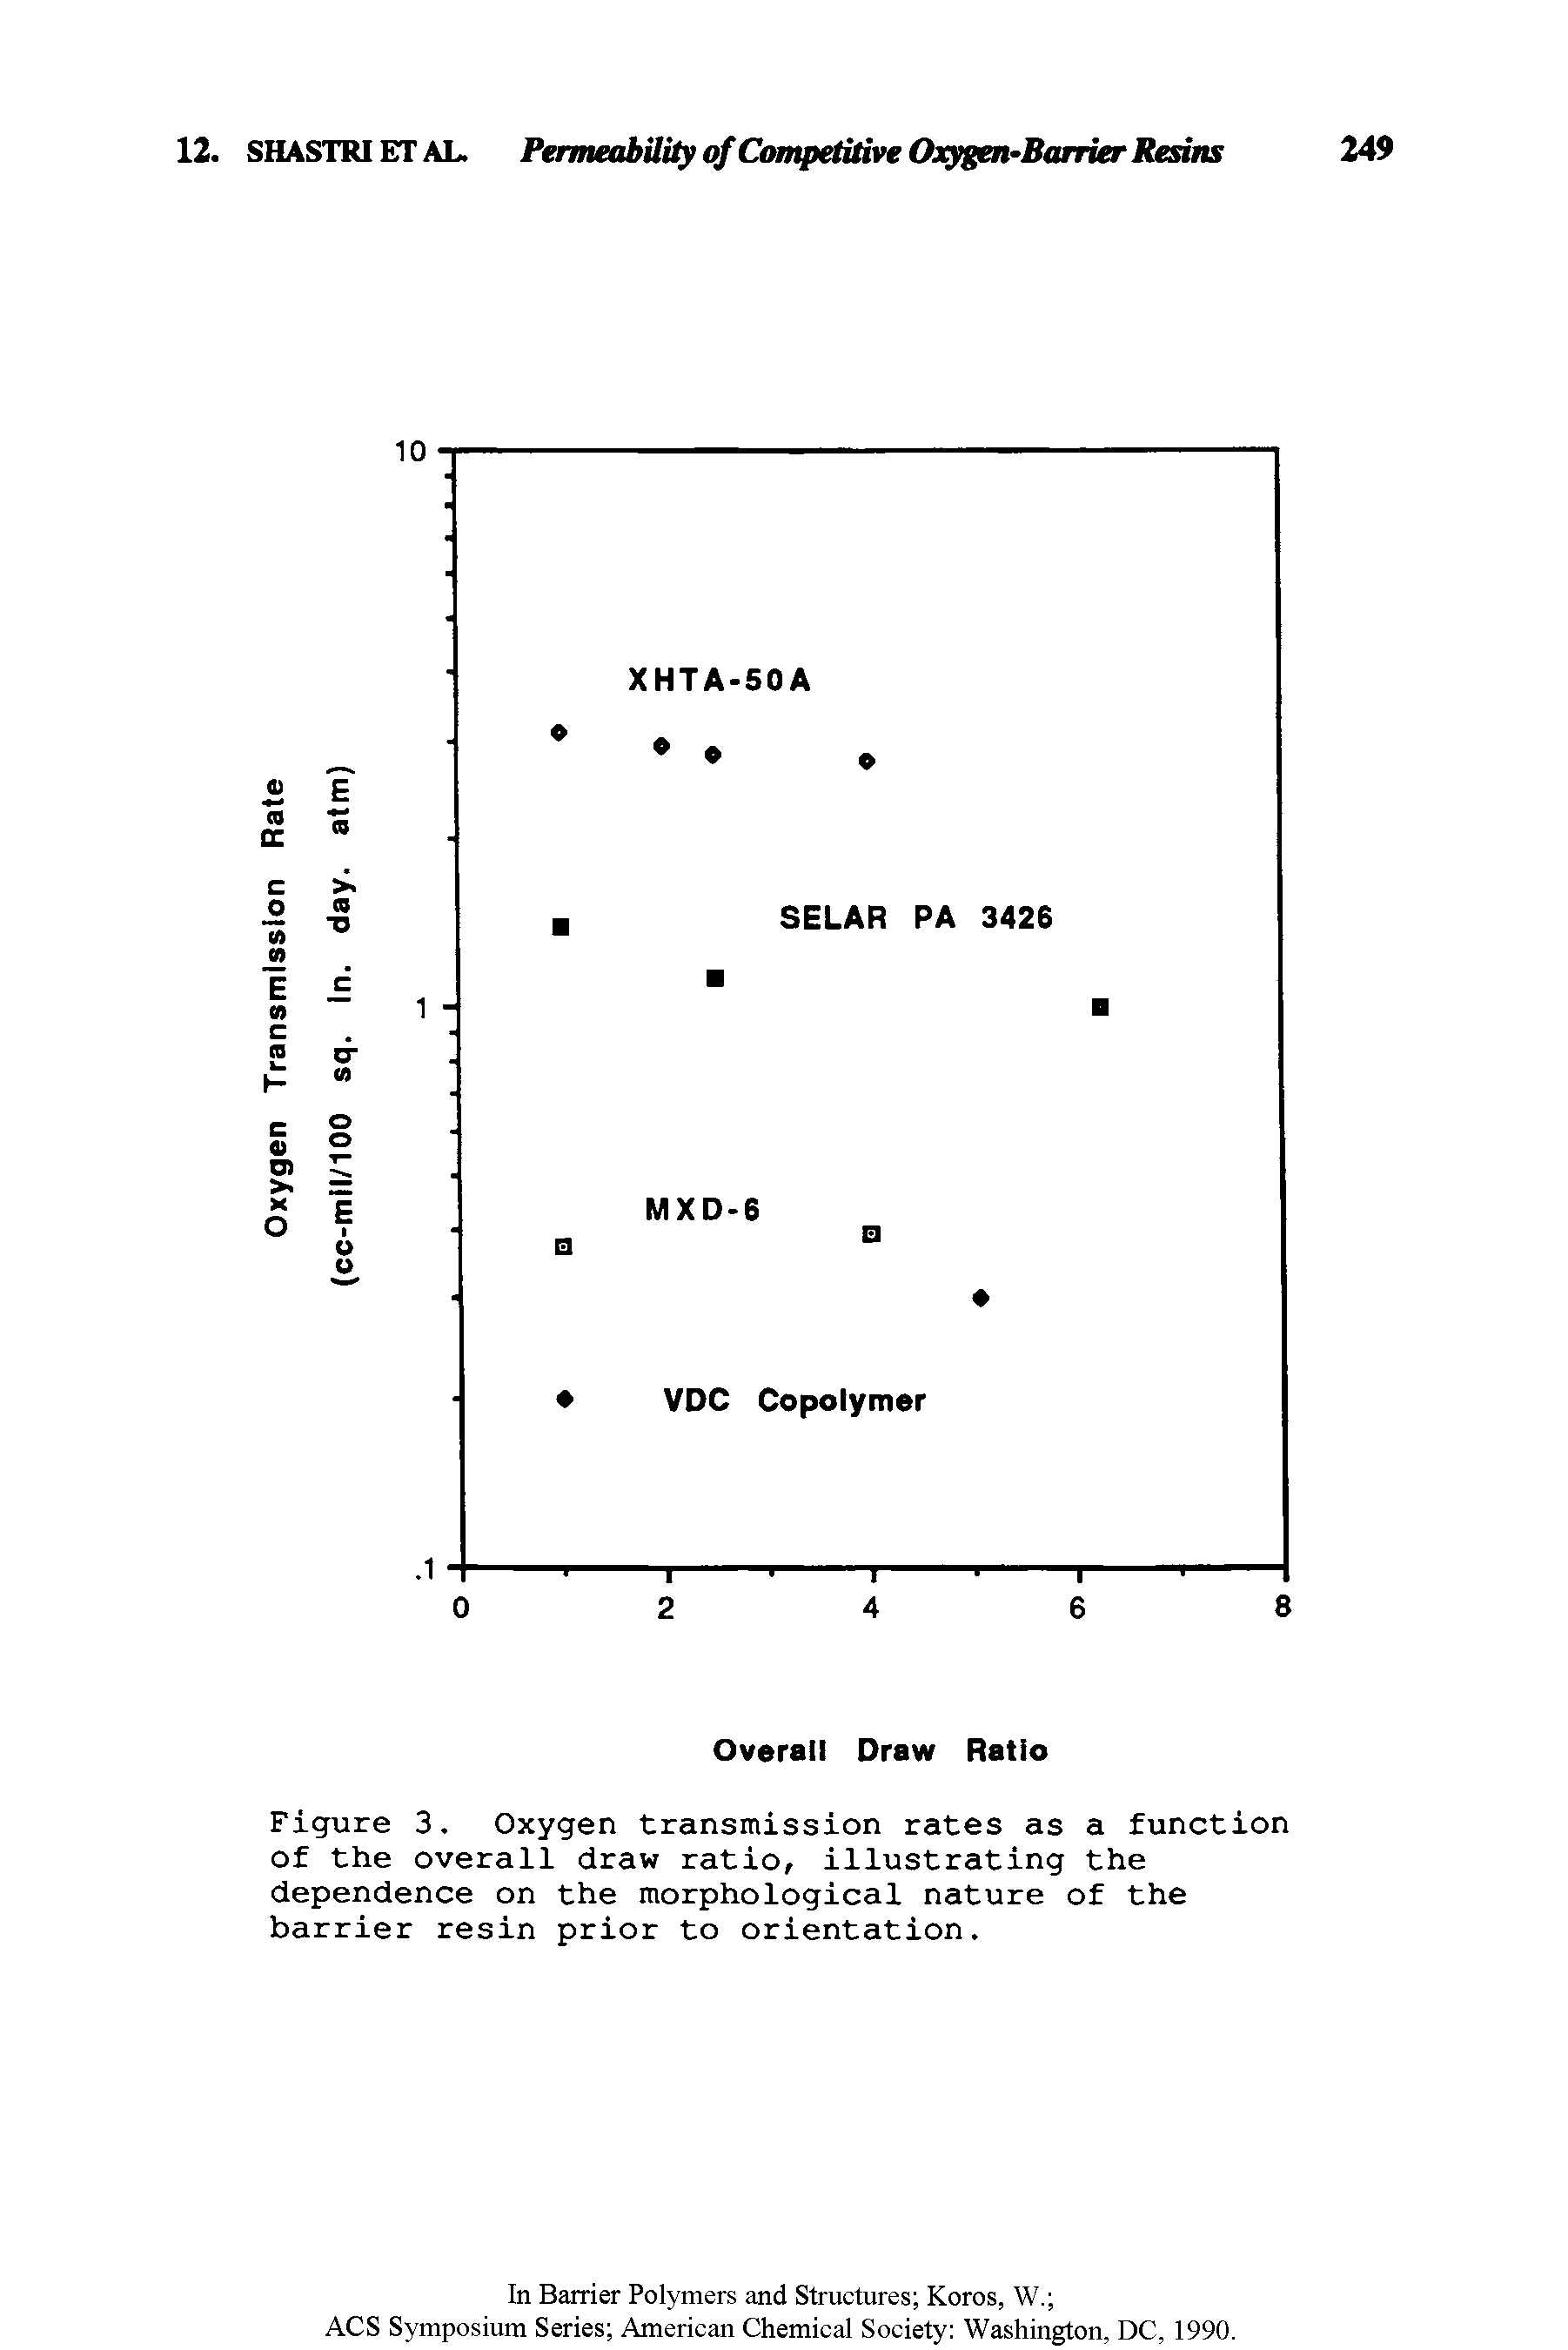 Figure 3. Oxygen transmission rates as a function of the overall draw ratio, illustrating the dependence on the morphological nature of the barrier resin prior to orientation.